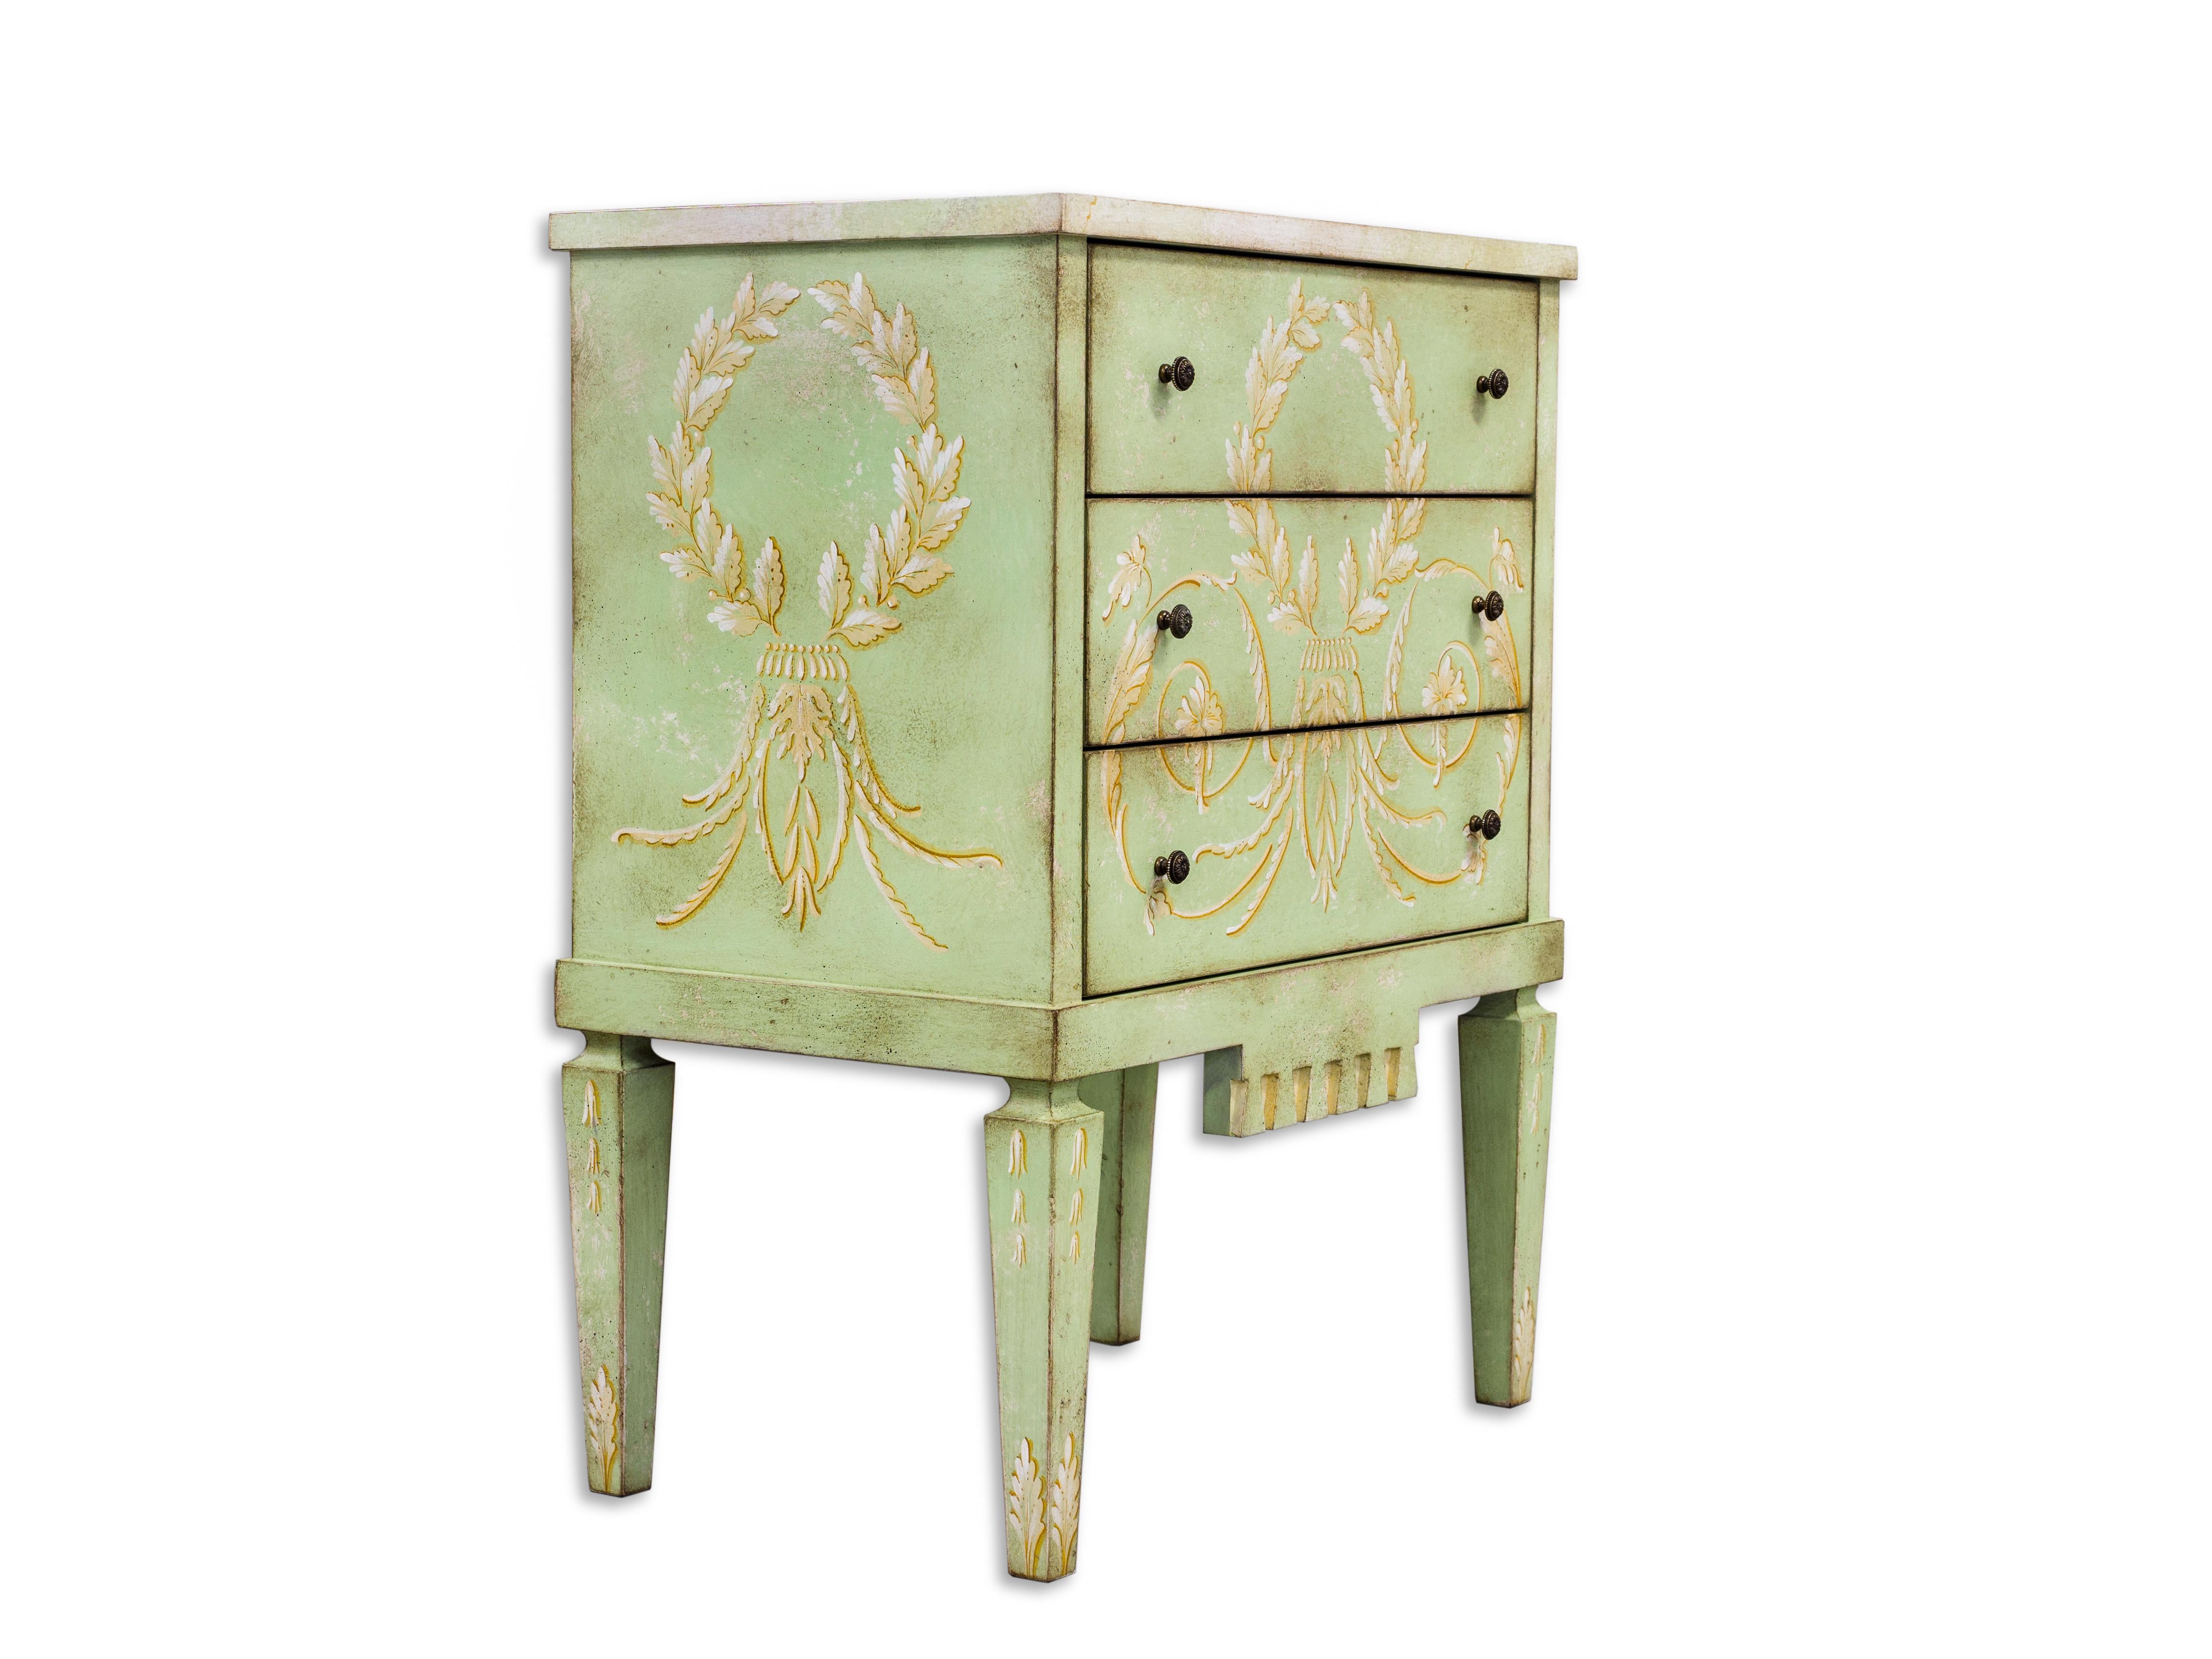 From our Hand-Painted Furniture Collection, we are pleased to introduce you to our La Fenice Nightstand with drawers. 
In a lively Apple Green color with reinassance inspired decor in ochre, this beautiful nightstand will bring along the historical